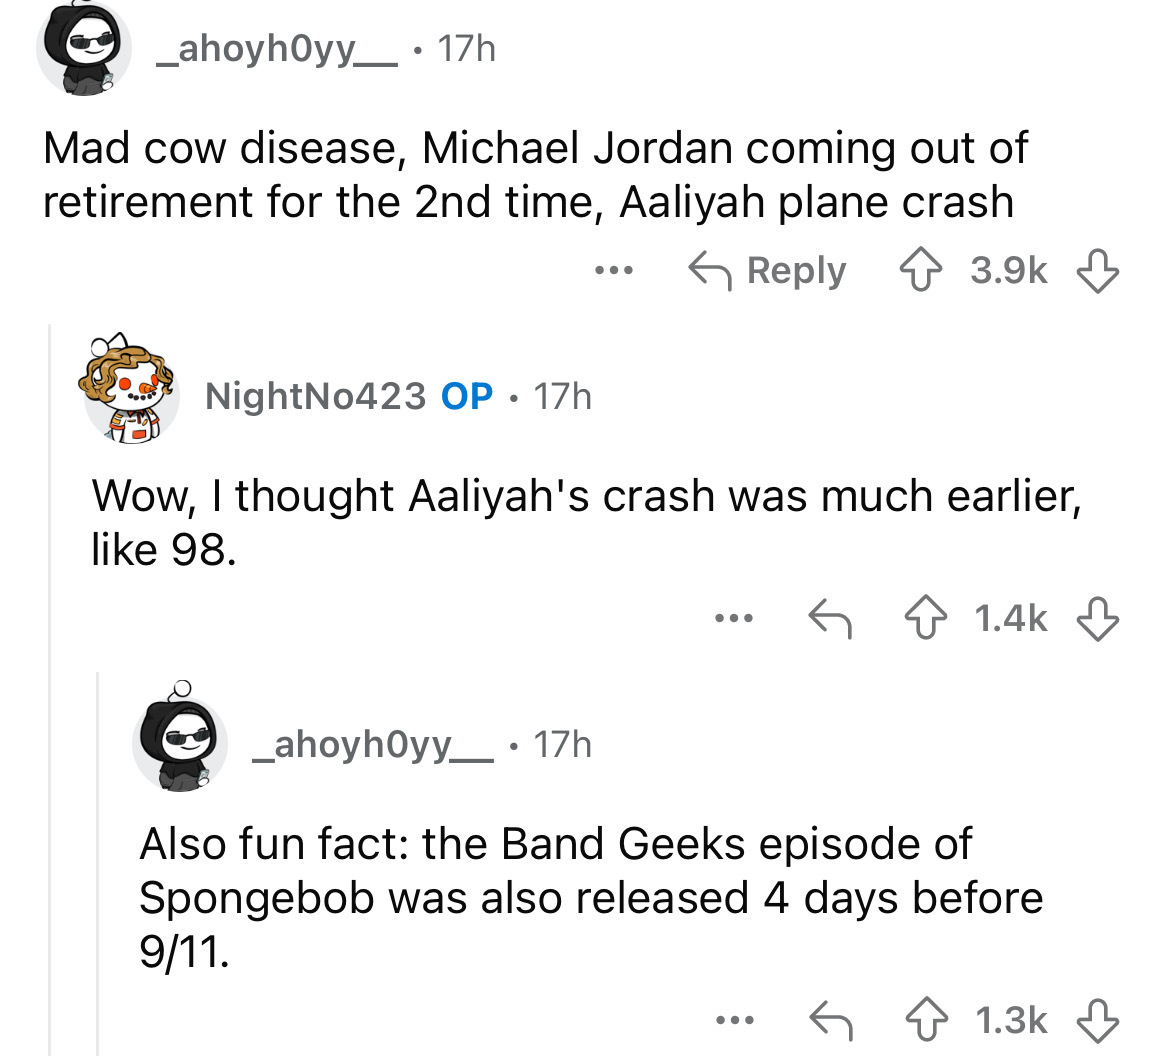 screenshot - _ ahoyhOyy_ 17h Mad cow disease, Michael Jordan coming out of retirement for the 2nd time, Aaliyah plane crash ... NightNo423 Op. 17h Wow, I thought Aaliyah's crash was much earlier, 98. ... _ahoyhOyy_.17h Also fun fact the Band Geeks episode